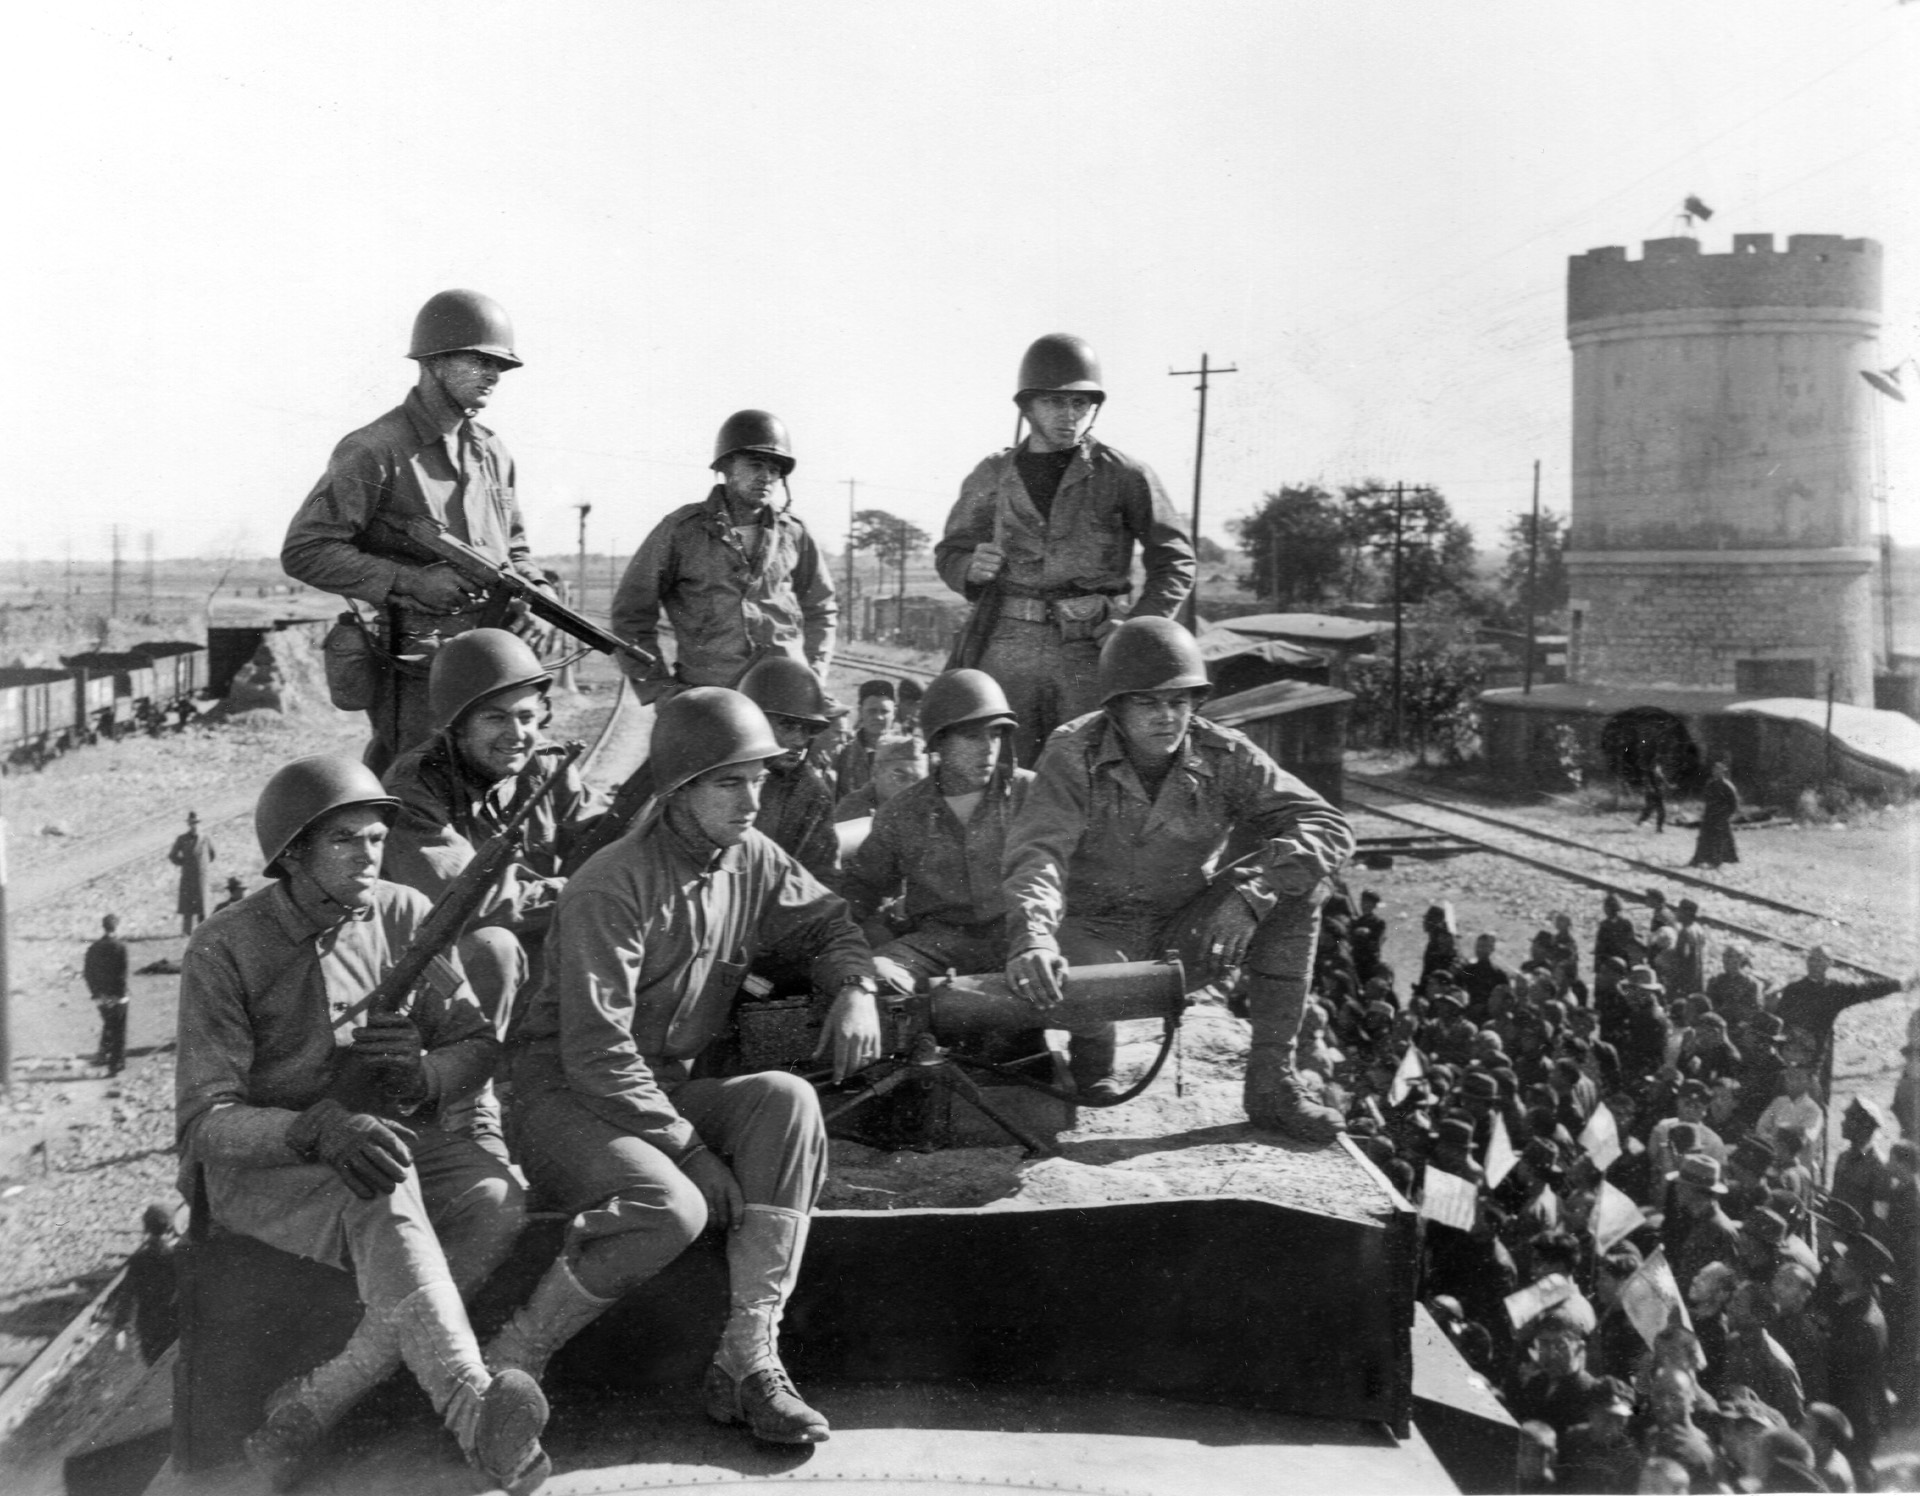 American Marines armed with a Browning .30-caliber water-cooled machine gun and other light weapons pose during efforts to evacuate former Japanese Army personnel after their surrender in China following World War II.